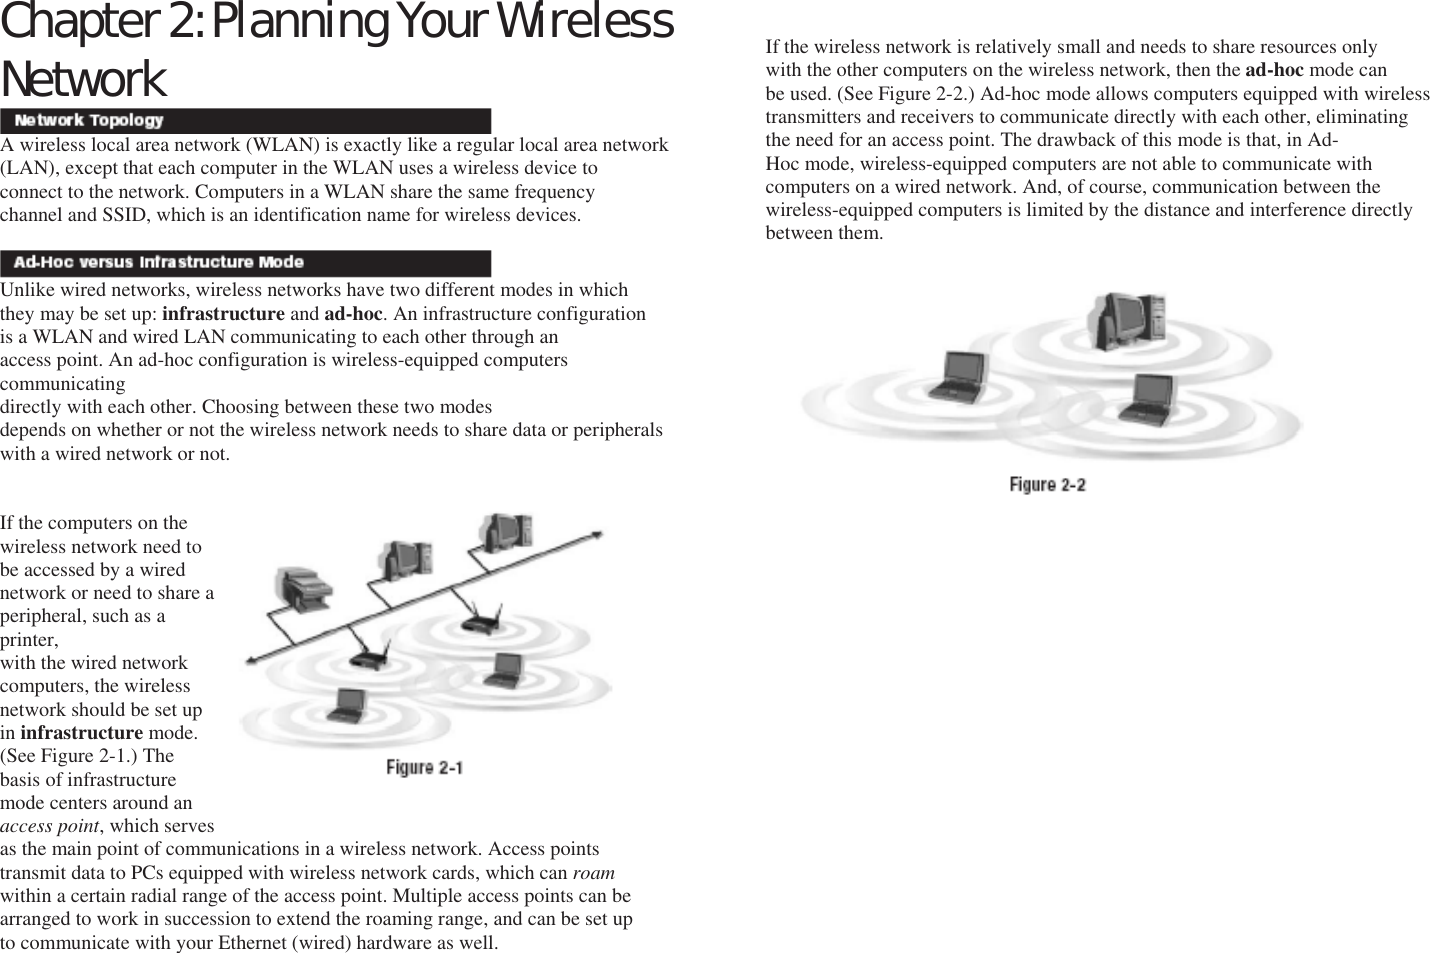 Chapter 2: Planning Your Wireless Network   A wireless local area network (WLAN) is exactly like a regular local area network (LAN), except that each computer in the WLAN uses a wireless device to connect to the network. Computers in a WLAN share the same frequency channel and SSID, which is an identification name for wireless devices.   Unlike wired networks, wireless networks have two different modes in which they may be set up: infrastructure and ad-hoc. An infrastructure configuration is a WLAN and wired LAN communicating to each other through an access point. An ad-hoc configuration is wireless-equipped computers communicating directly with each other. Choosing between these two modes depends on whether or not the wireless network needs to share data or peripherals with a wired network or not.   If the computers on the wireless network need to be accessed by a wired network or need to share a peripheral, such as a printer, with the wired network computers, the wireless network should be set up in infrastructure mode. (See Figure 2-1.) The basis of infrastructure mode centers around an access point, which serves as the main point of communications in a wireless network. Access points transmit data to PCs equipped with wireless network cards, which can roam within a certain radial range of the access point. Multiple access points can be arranged to work in succession to extend the roaming range, and can be set up to communicate with your Ethernet (wired) hardware as well. Network Topology Ad-Hoc versus Infrastructure Mode If the wireless network is relatively small and needs to share resources only with the other computers on the wireless network, then the ad-hoc mode can be used. (See Figure 2-2.) Ad-hoc mode allows computers equipped with wireless transmitters and receivers to communicate directly with each other, eliminating the need for an access point. The drawback of this mode is that, in Ad- Hoc mode, wireless-equipped computers are not able to communicate with computers on a wired network. And, of course, communication between the wireless-equipped computers is limited by the distance and interference directly between them.                                      